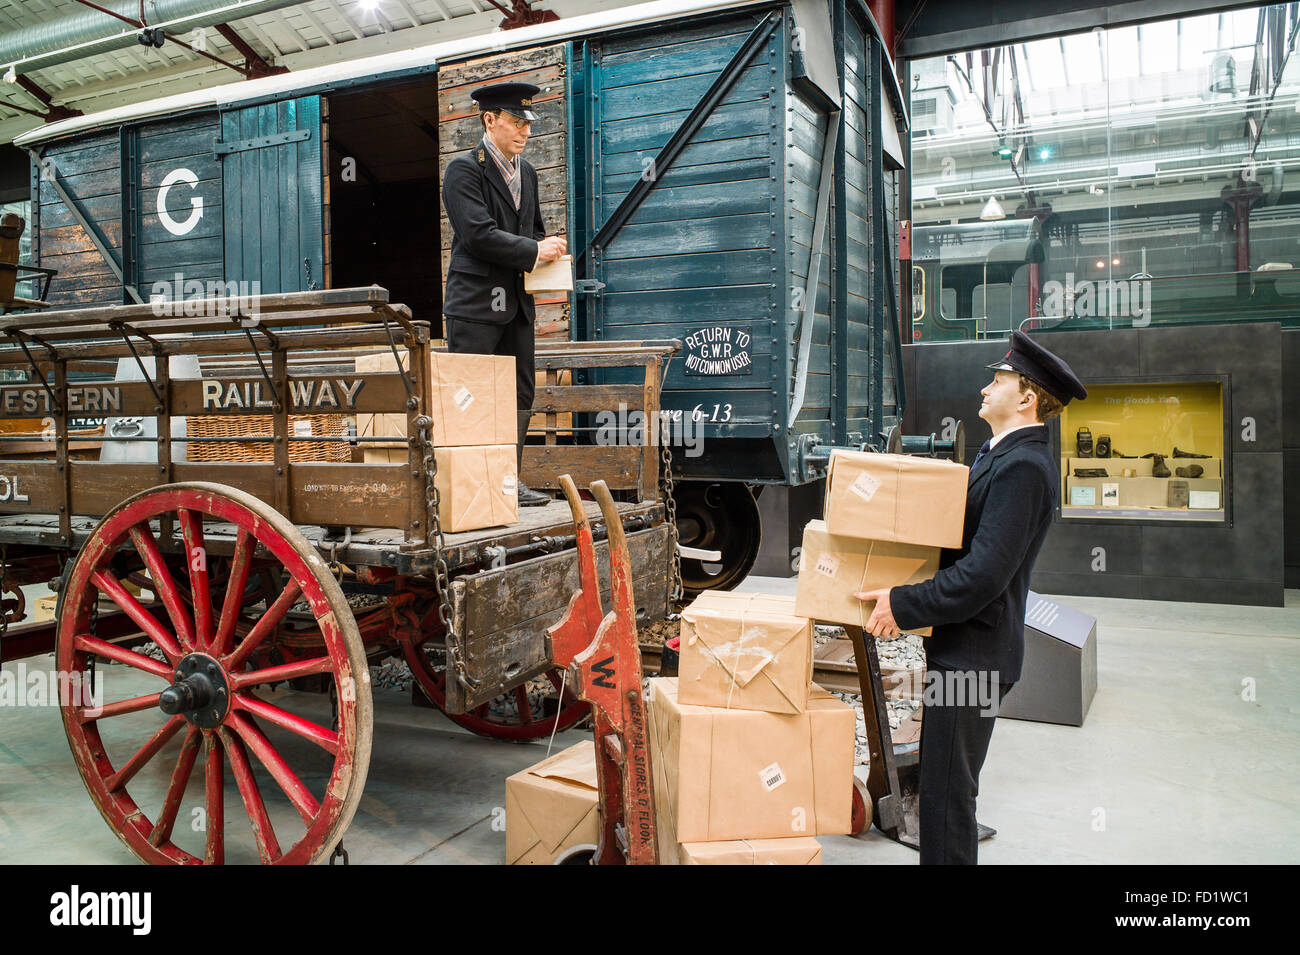 STEAM Museum replication of GWR goods staff processing railway freight from the 1920s Stock Photo